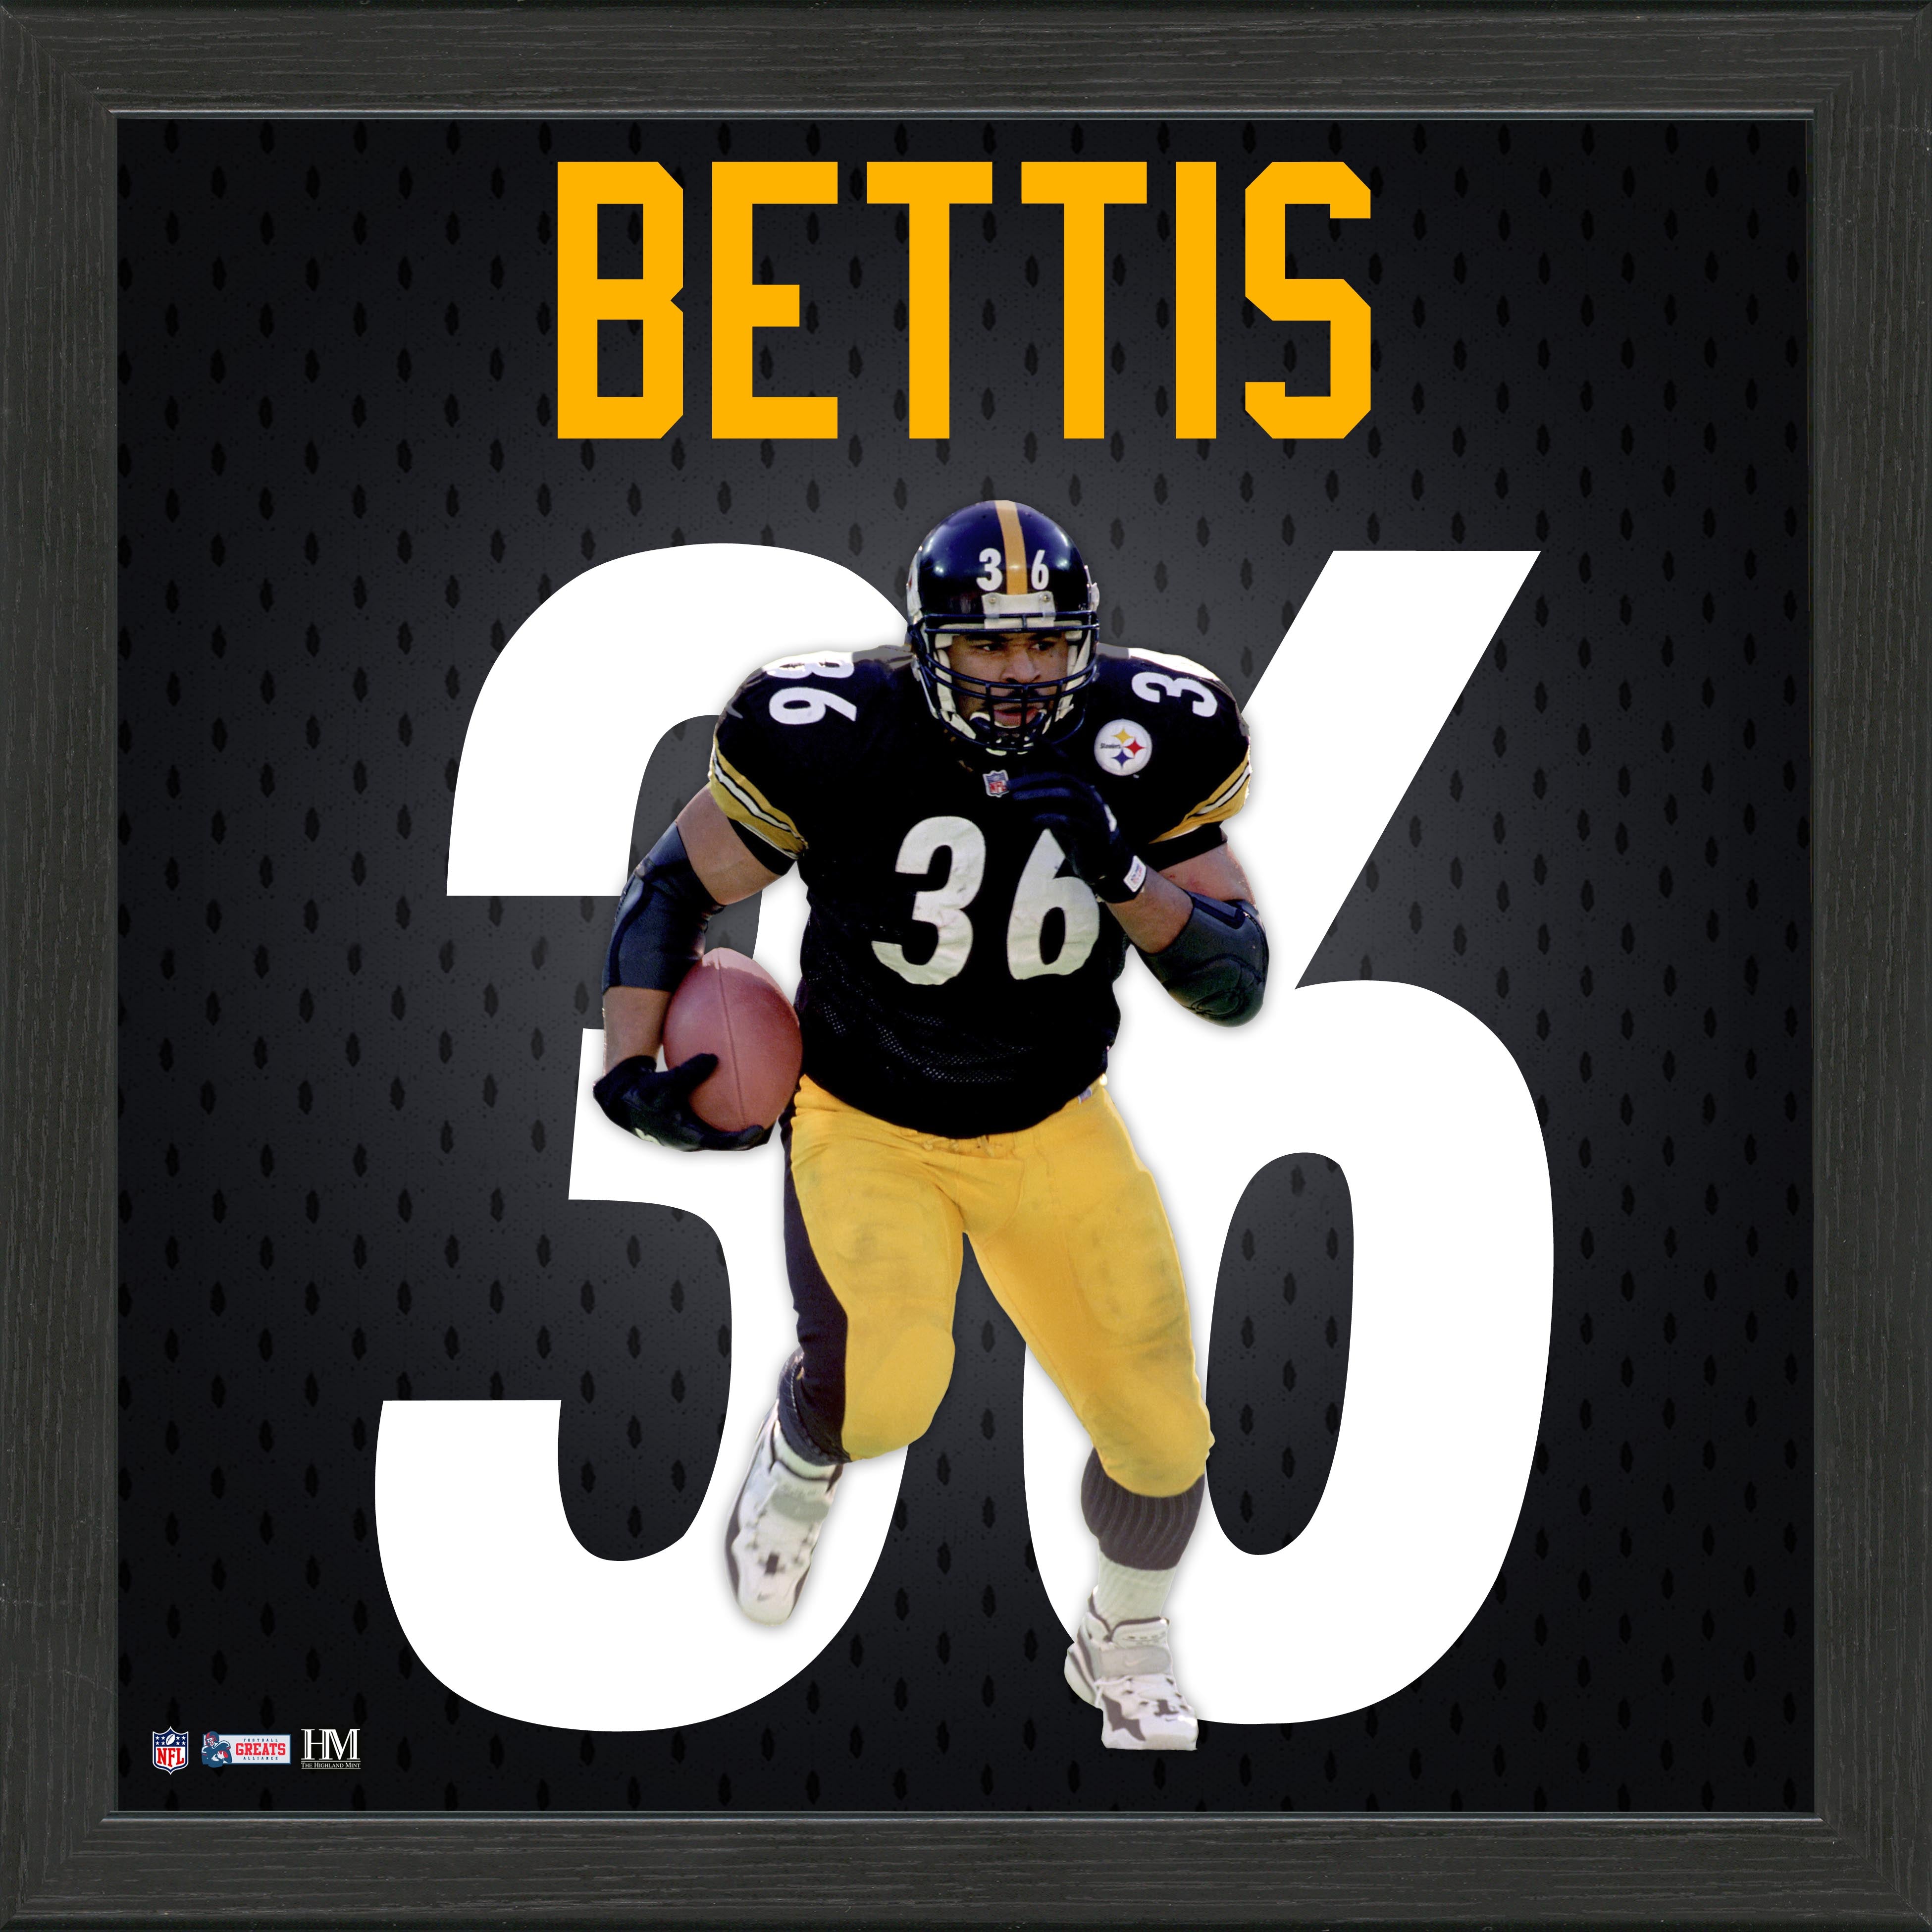 Jerome Bettis Jersey Number Frame